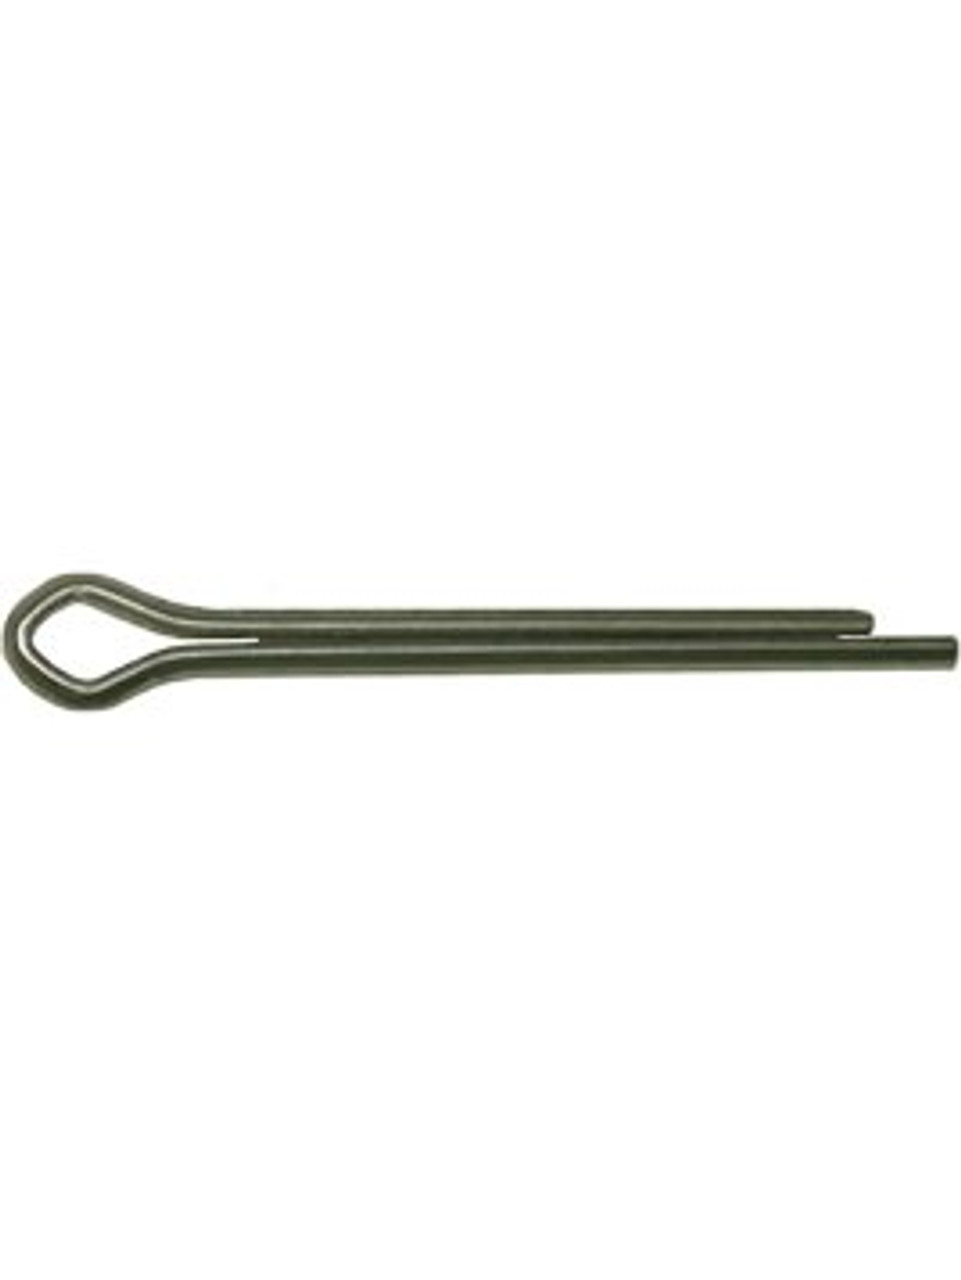 CP316 --- Cotter Pin  3/16" x 2"